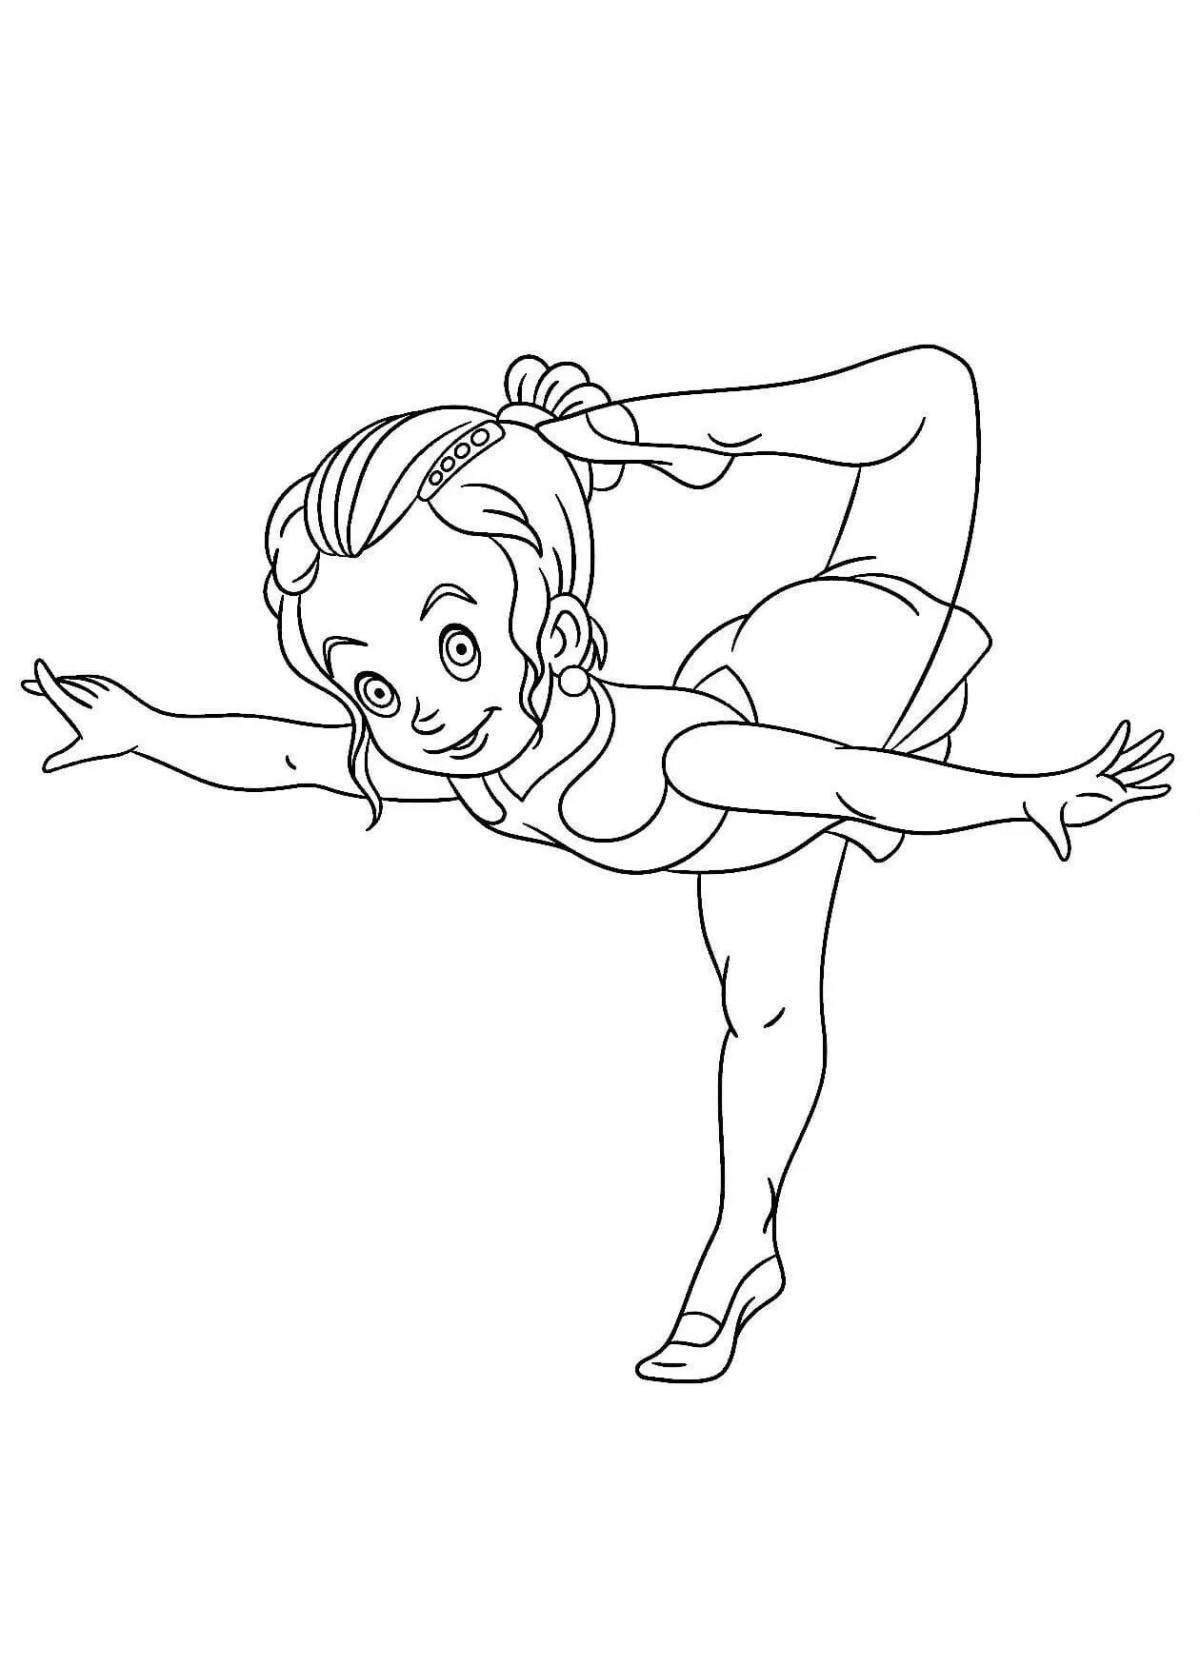 Energetic gymnastics coloring pages for girls